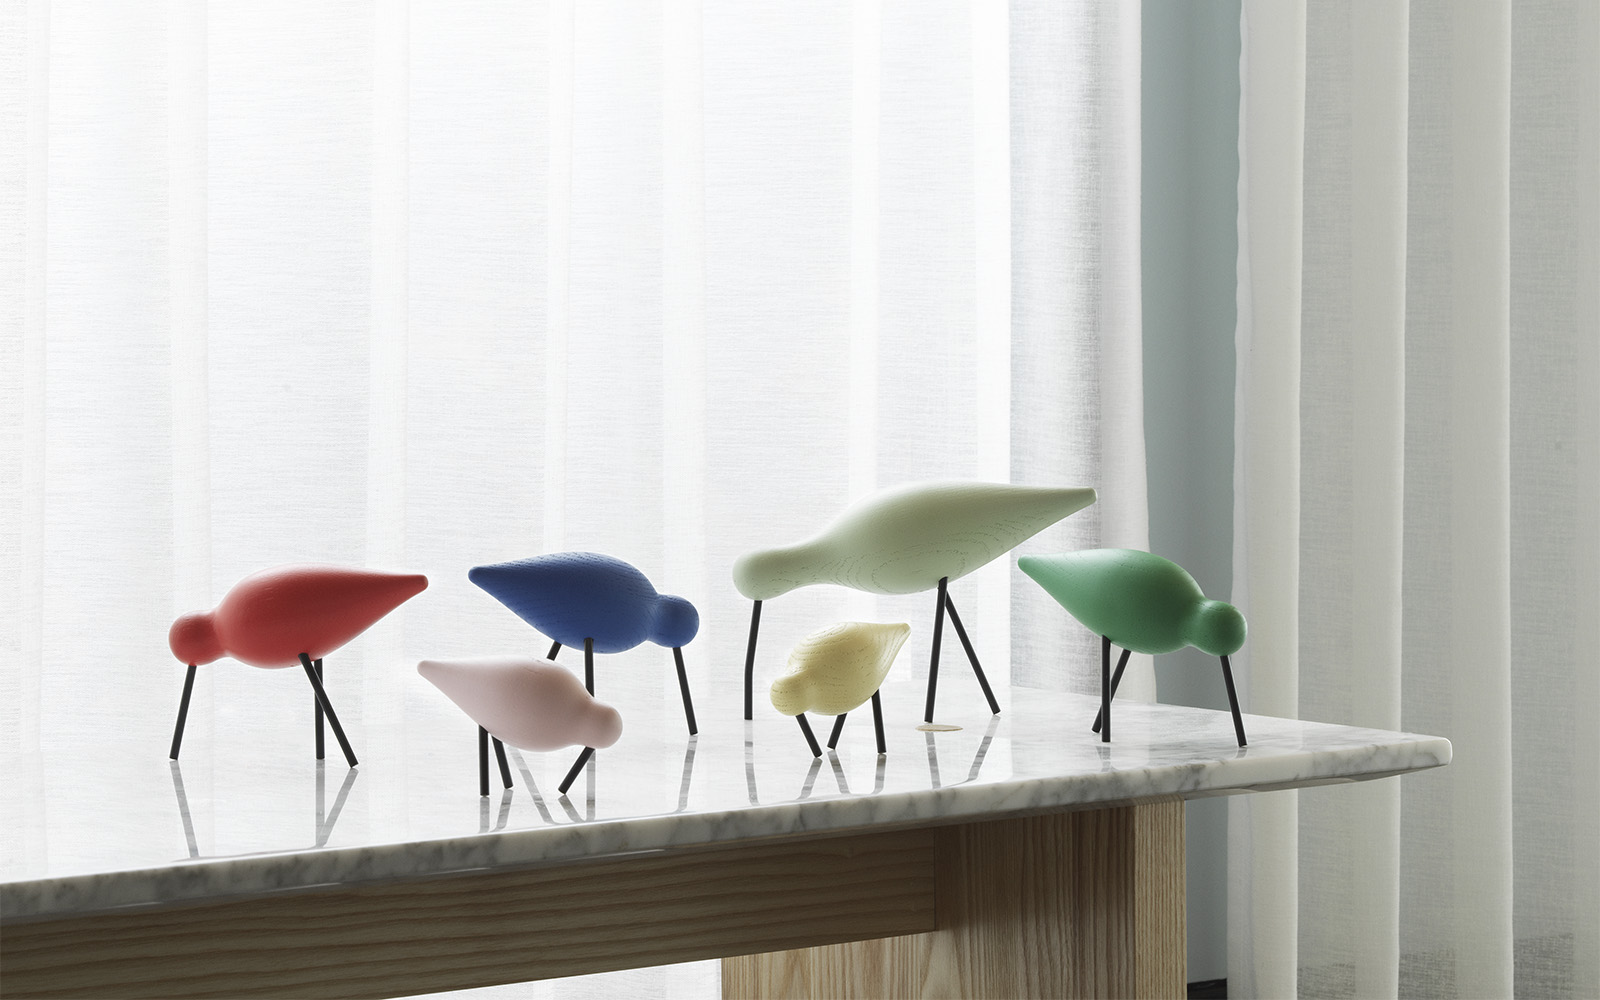 Shorebird - Red, Pink, Blue, Dusty green, Yellow and green - standing on a Solid Table - Normann Copenhagen